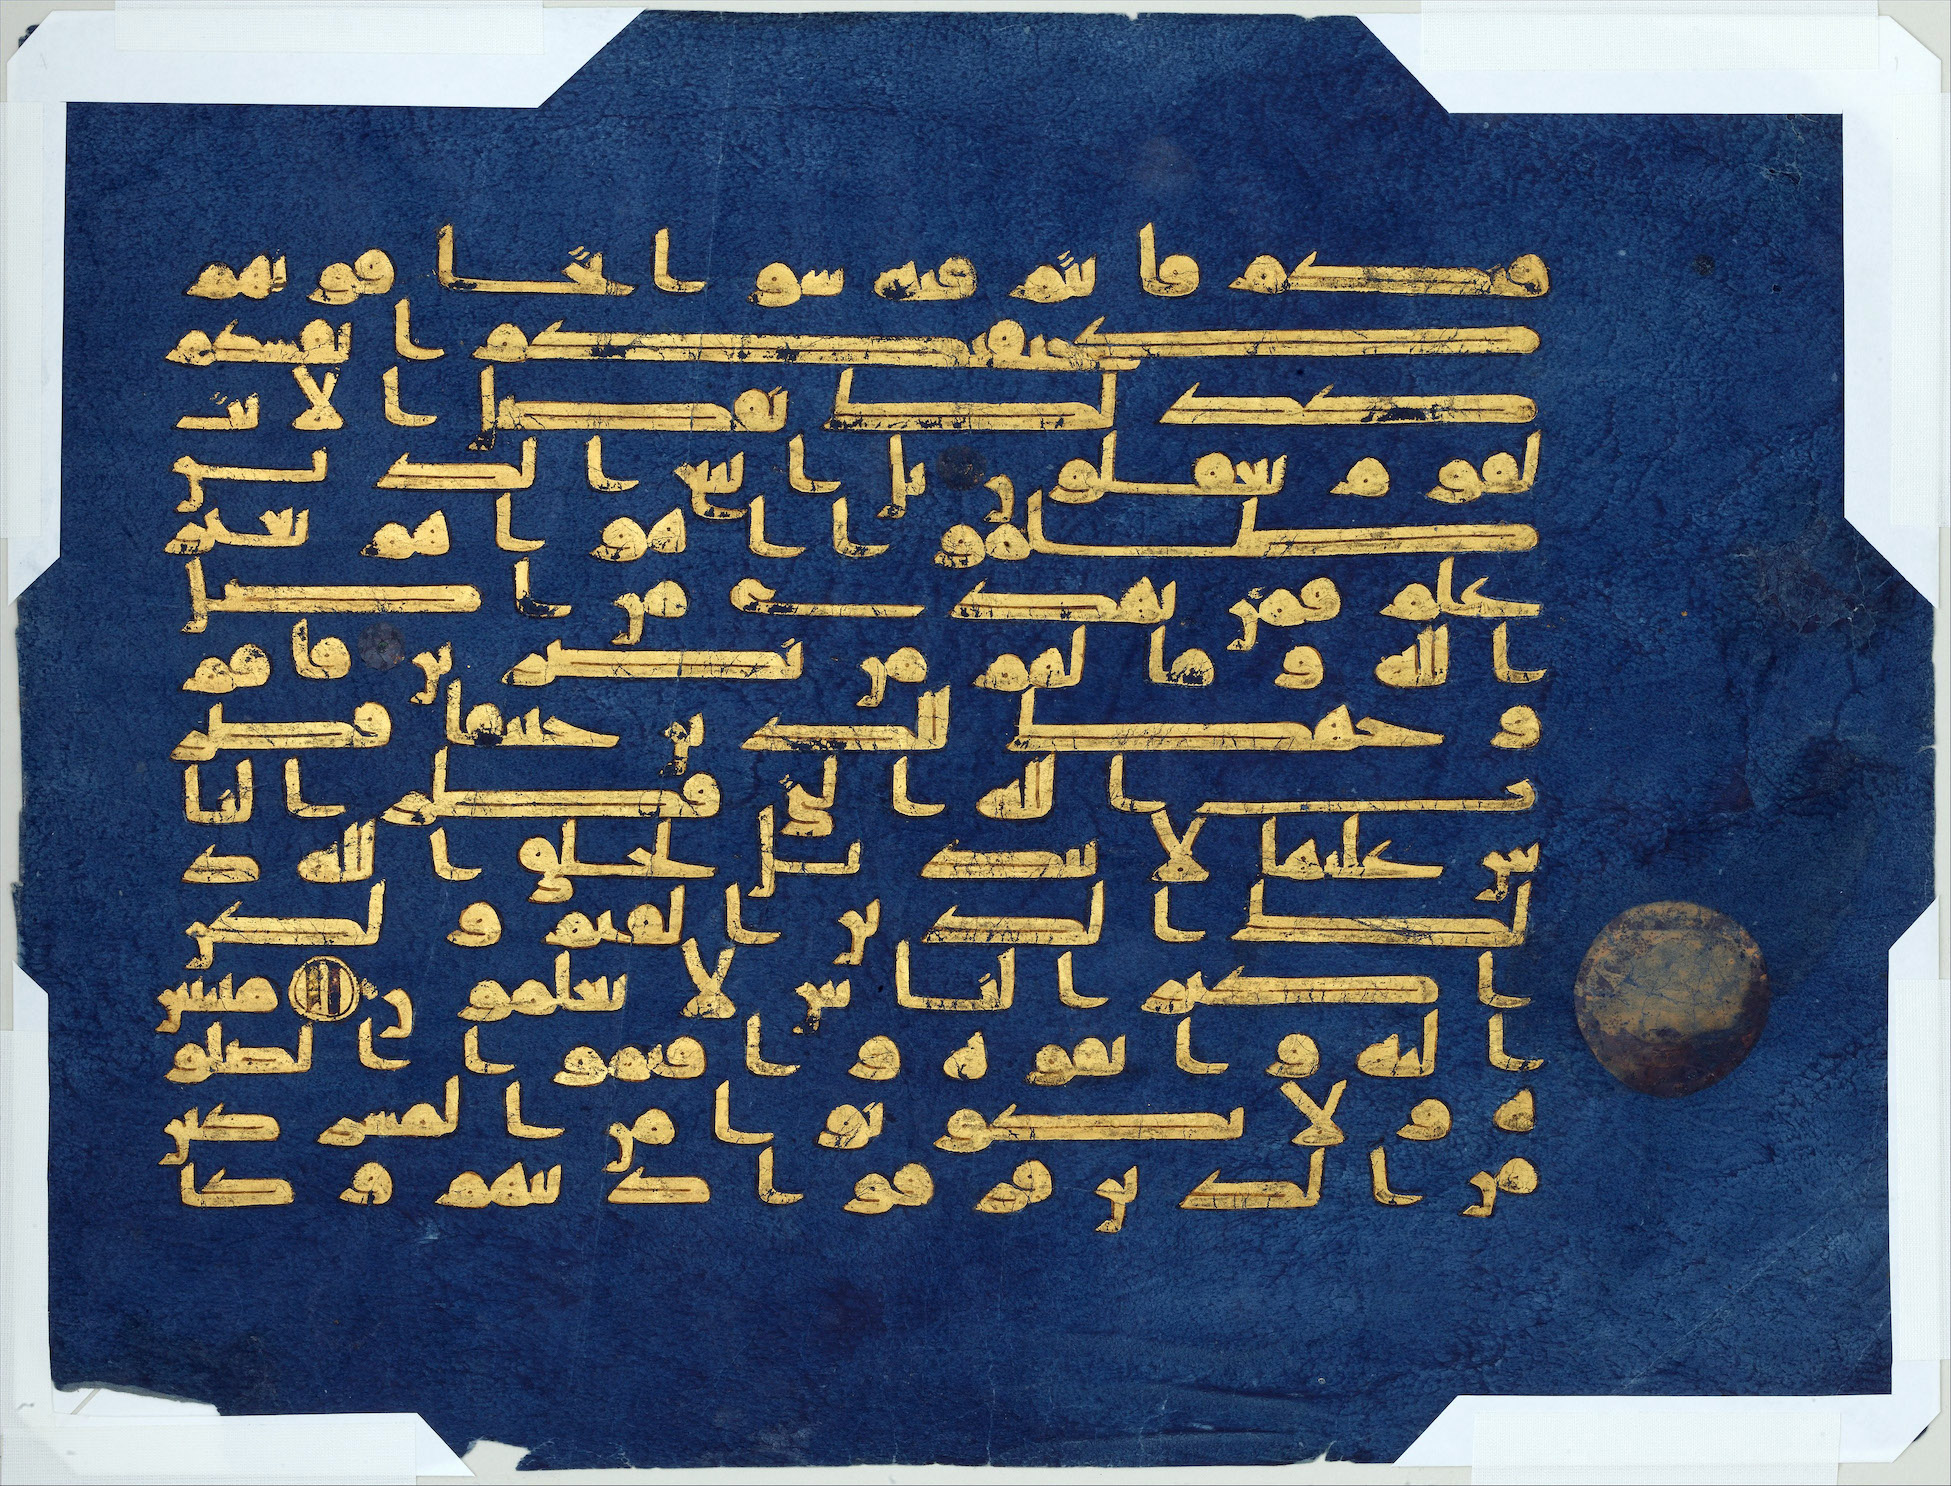 Folio from the "Blue Qur'an", second half 9th–mid-10th century, gold and silver on indigo-dyed parchment, made in Tunisia, possibly Qairawan, 30.4 x 40.2 cm (The Metropolitan Museum of Art)